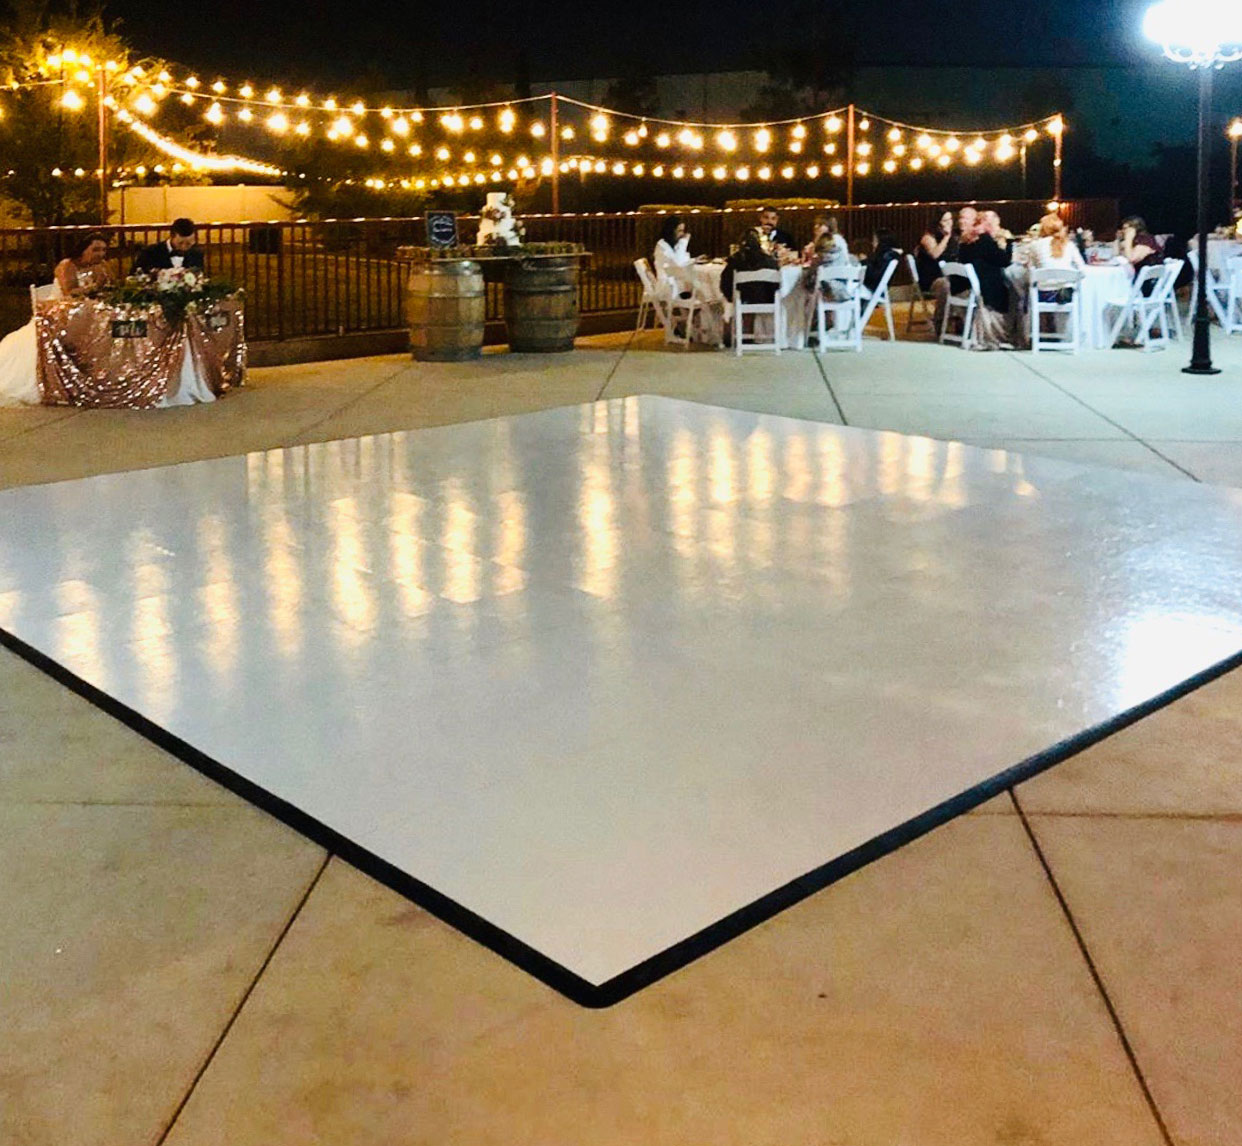 Slate White dance floor at a wedding during the nighttime